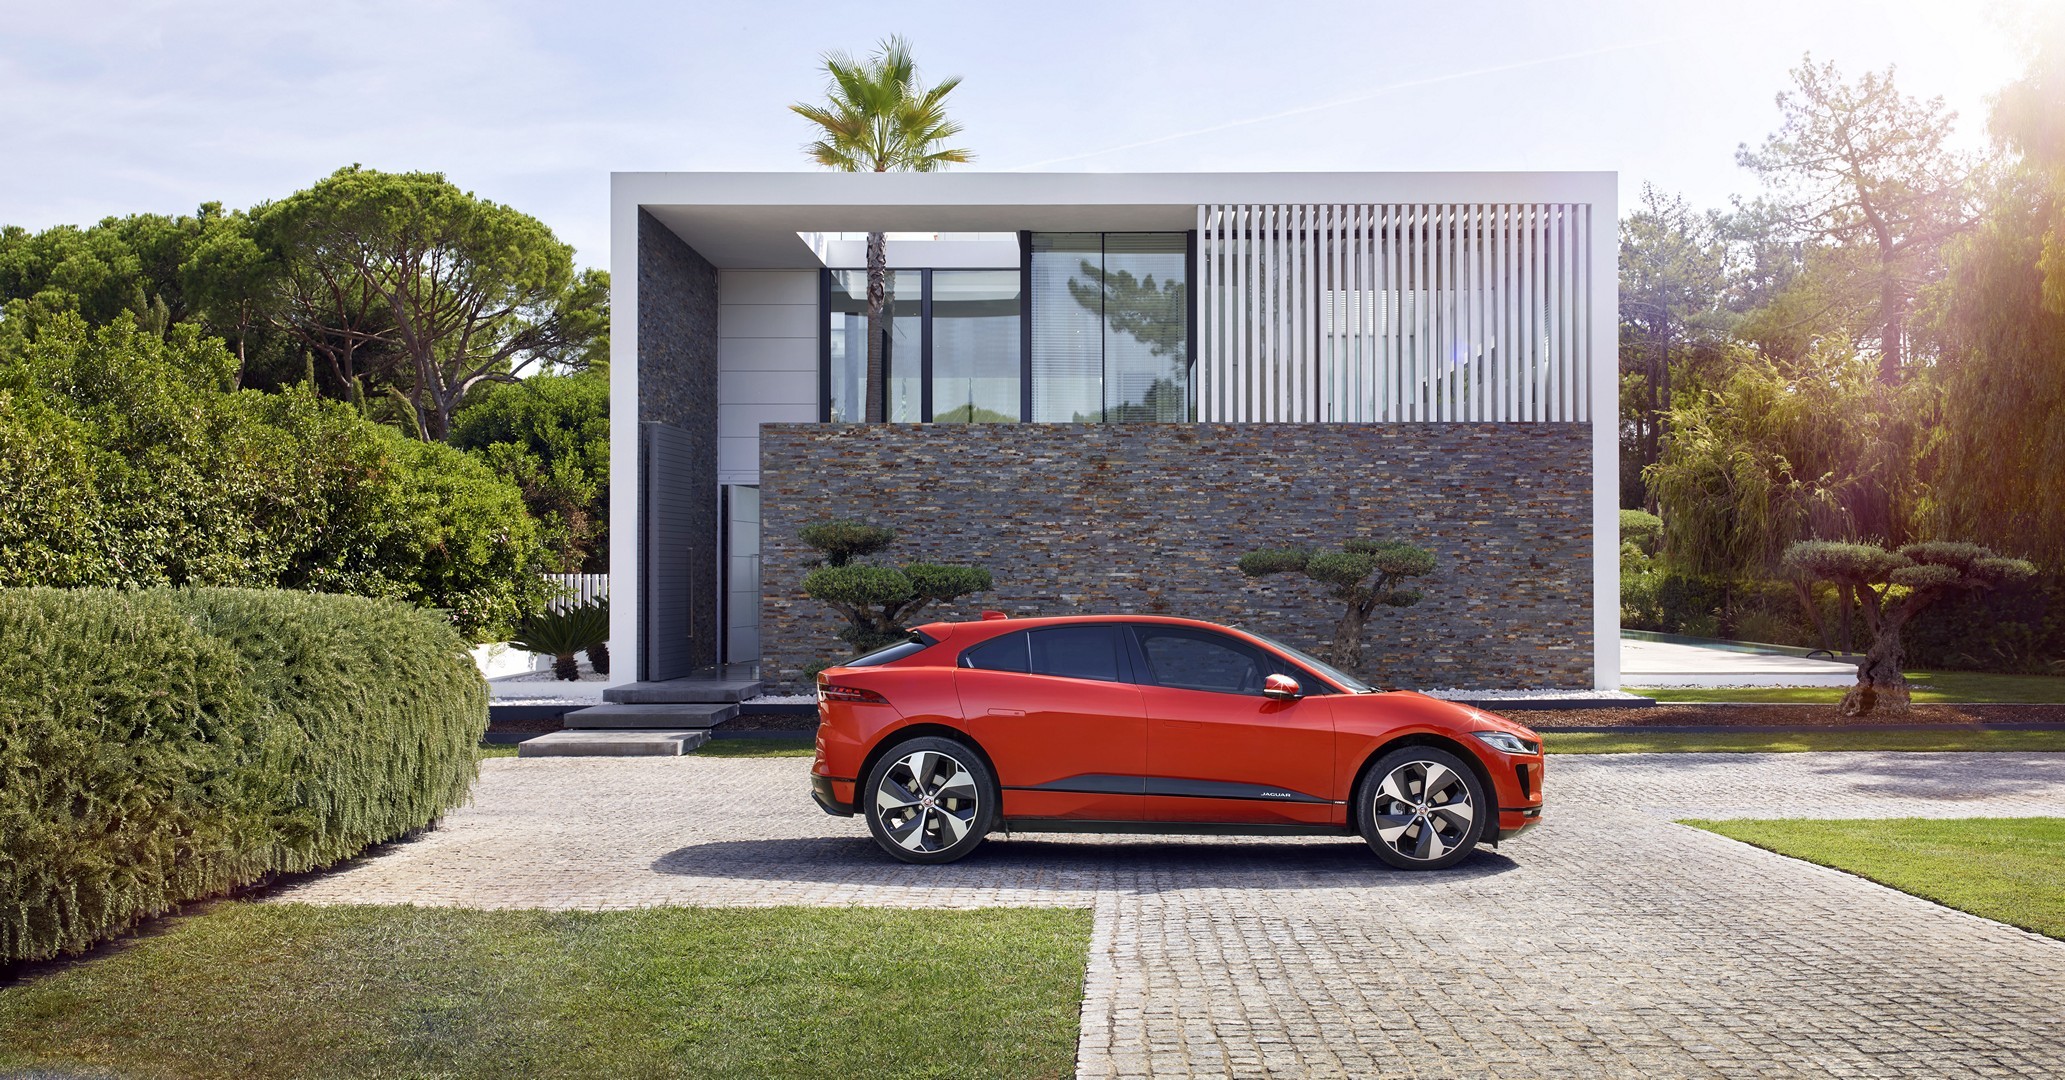 https://s1.cdn.autoevolution.com/images/news/gallery/2020-jaguar-i-pace-update-offers-234-miles-of-range-thanks-to-etrophy-know-how_76.jpg